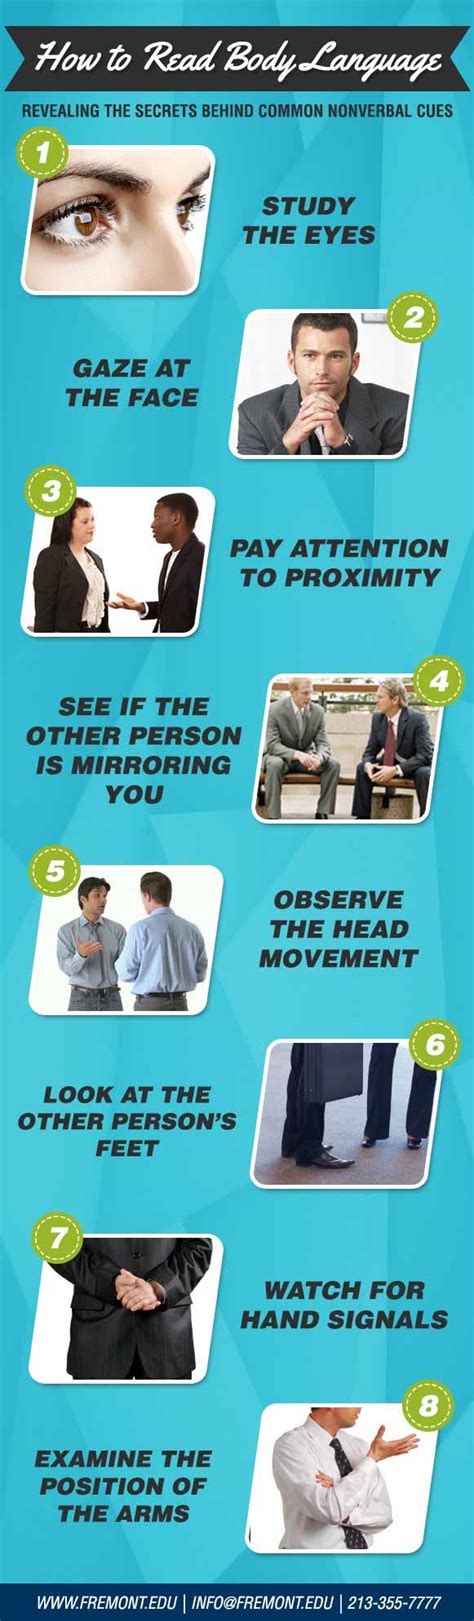 Use This Body Language Cheat Sheet To Decode Common Non Verbal Cues